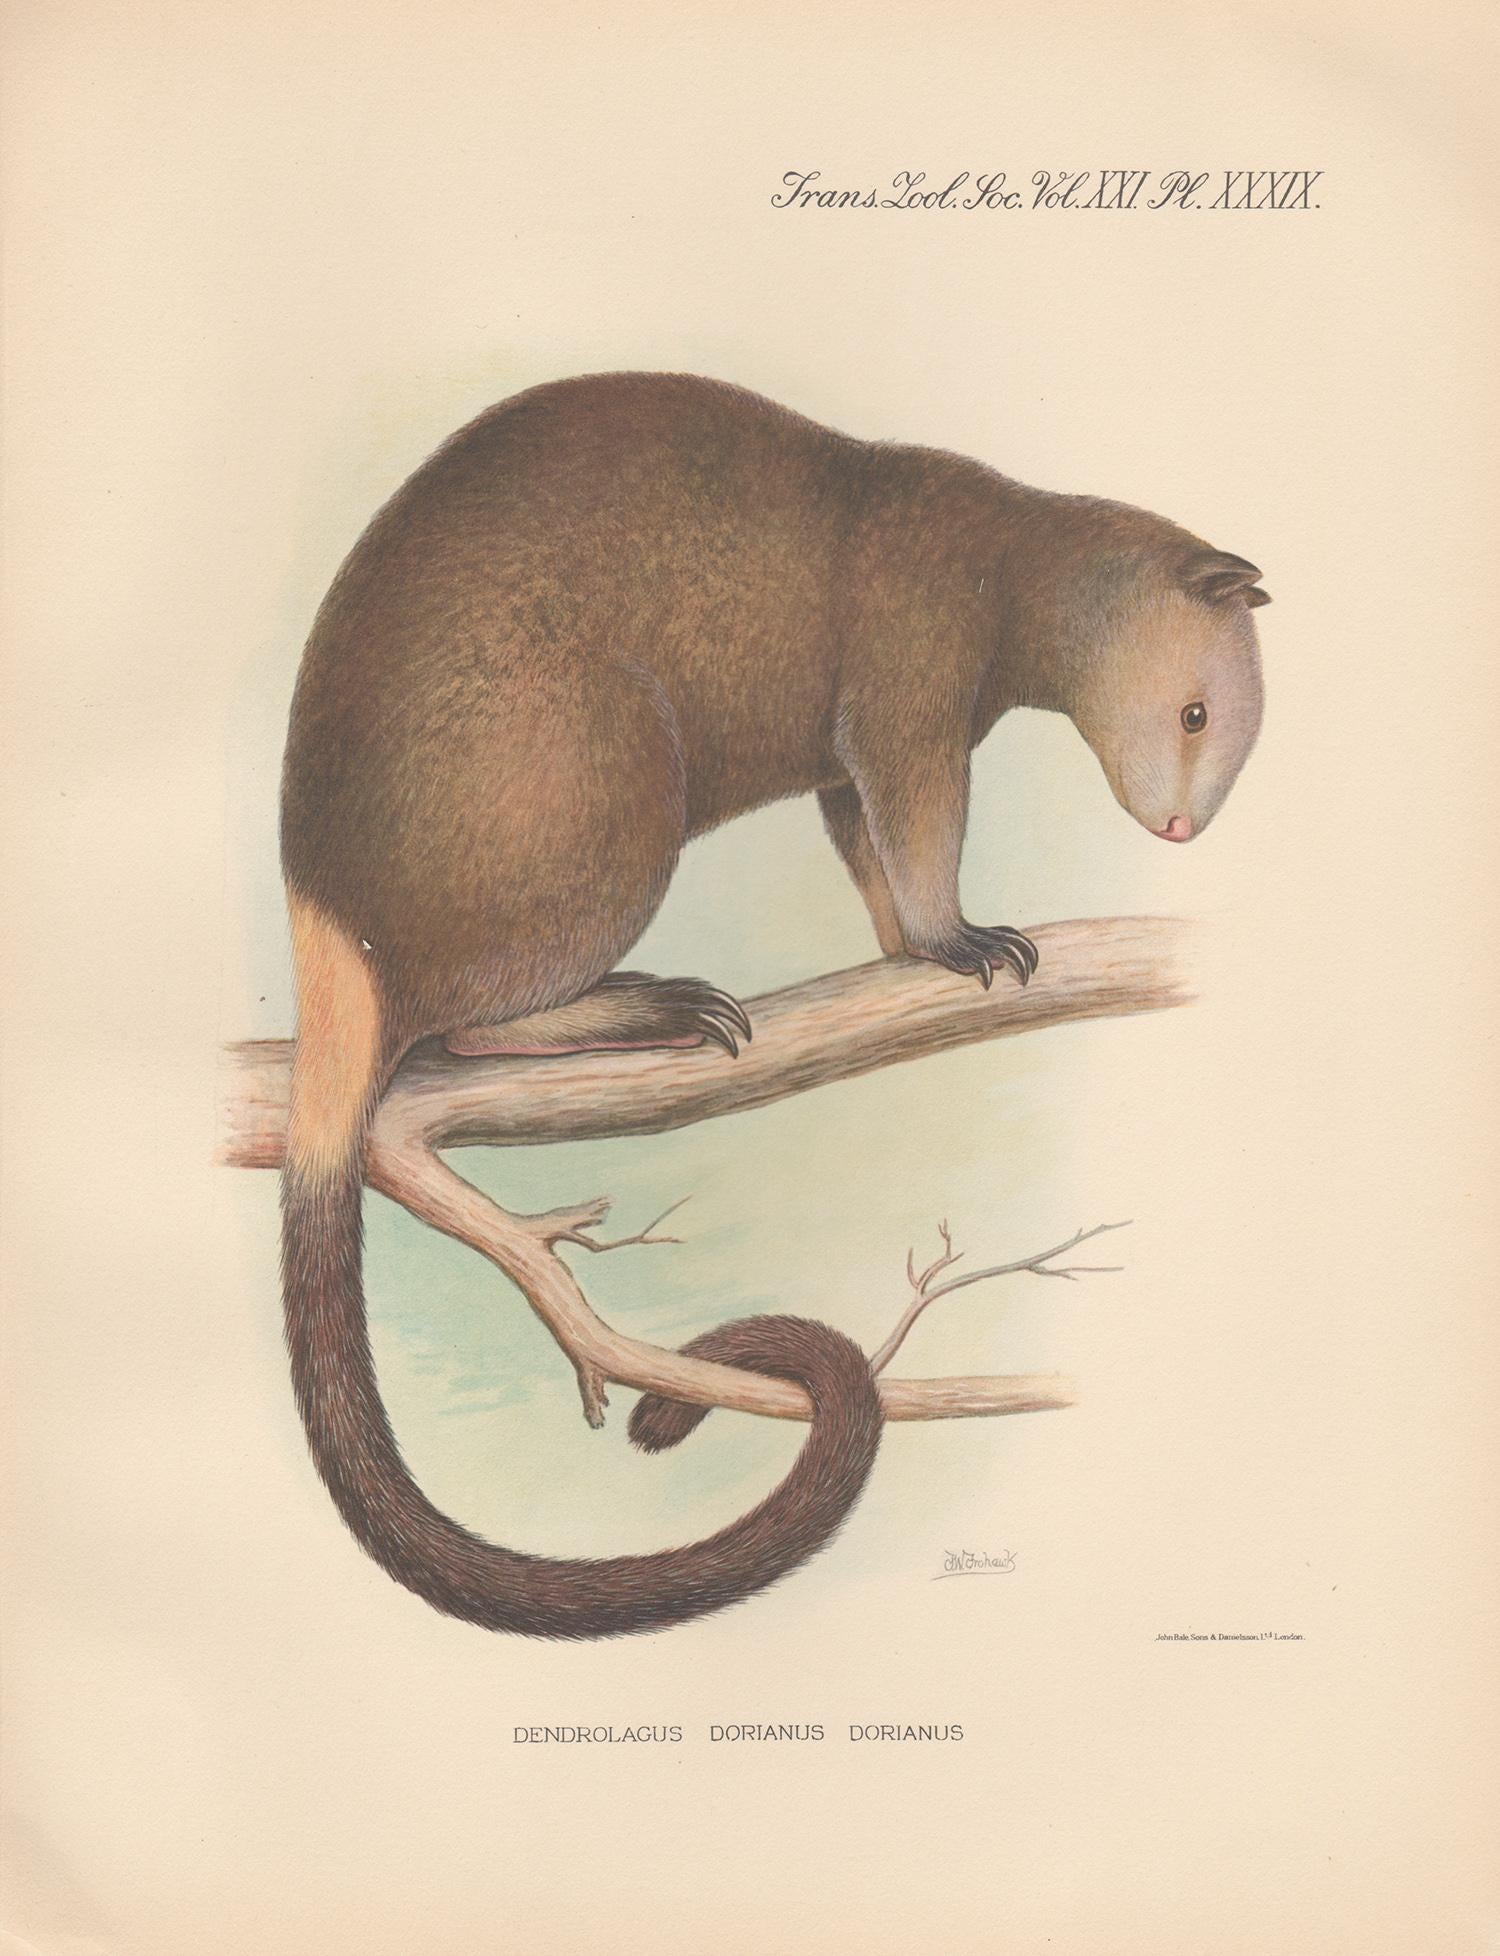 Frederick William Frohawk Animal Print - Grizzled Tree Kangaroo, New Guinea natural history animal lithograph, 1936